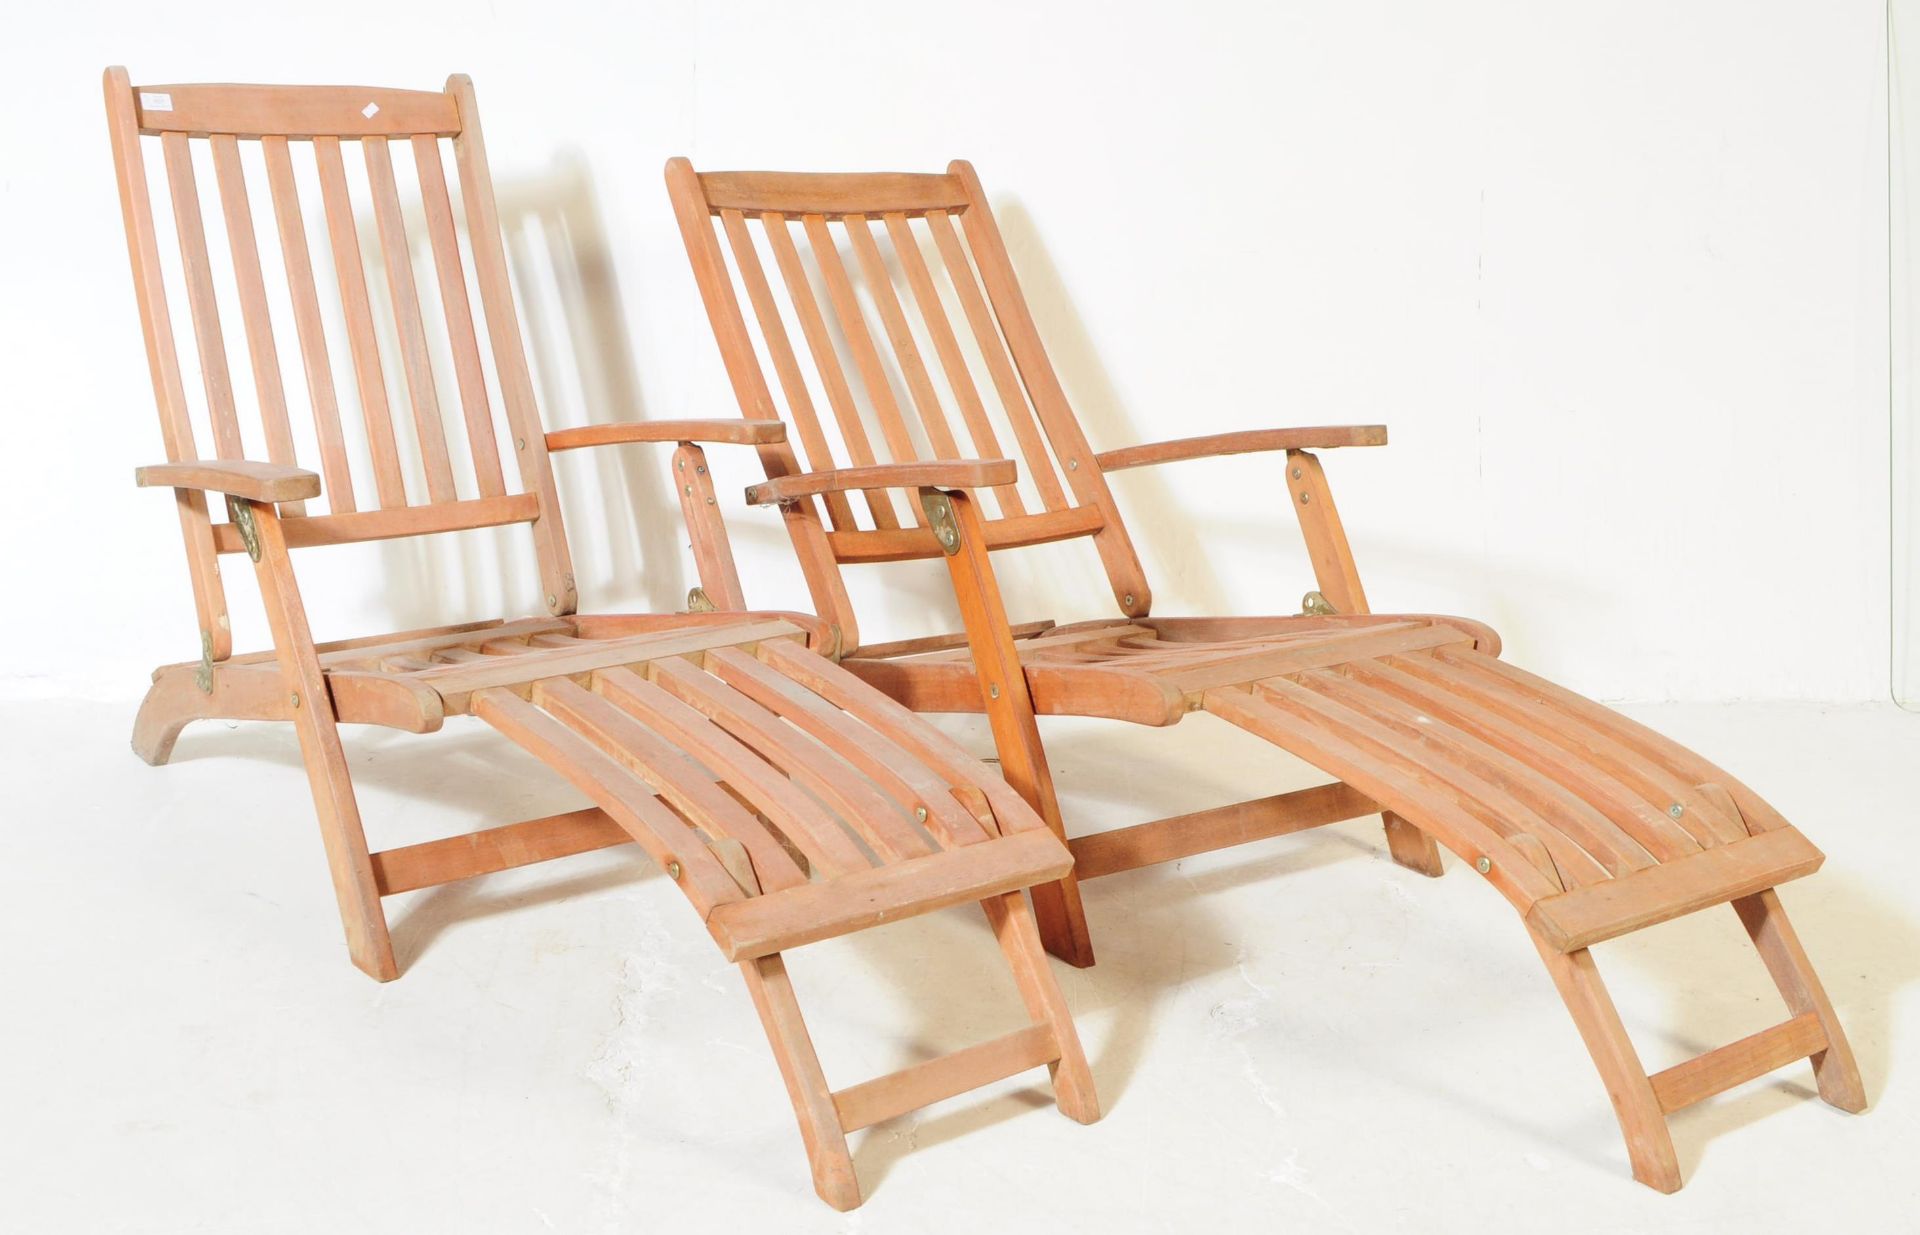 PAIR OF 20TH CENTURY FOLDING DECK CHAIRS